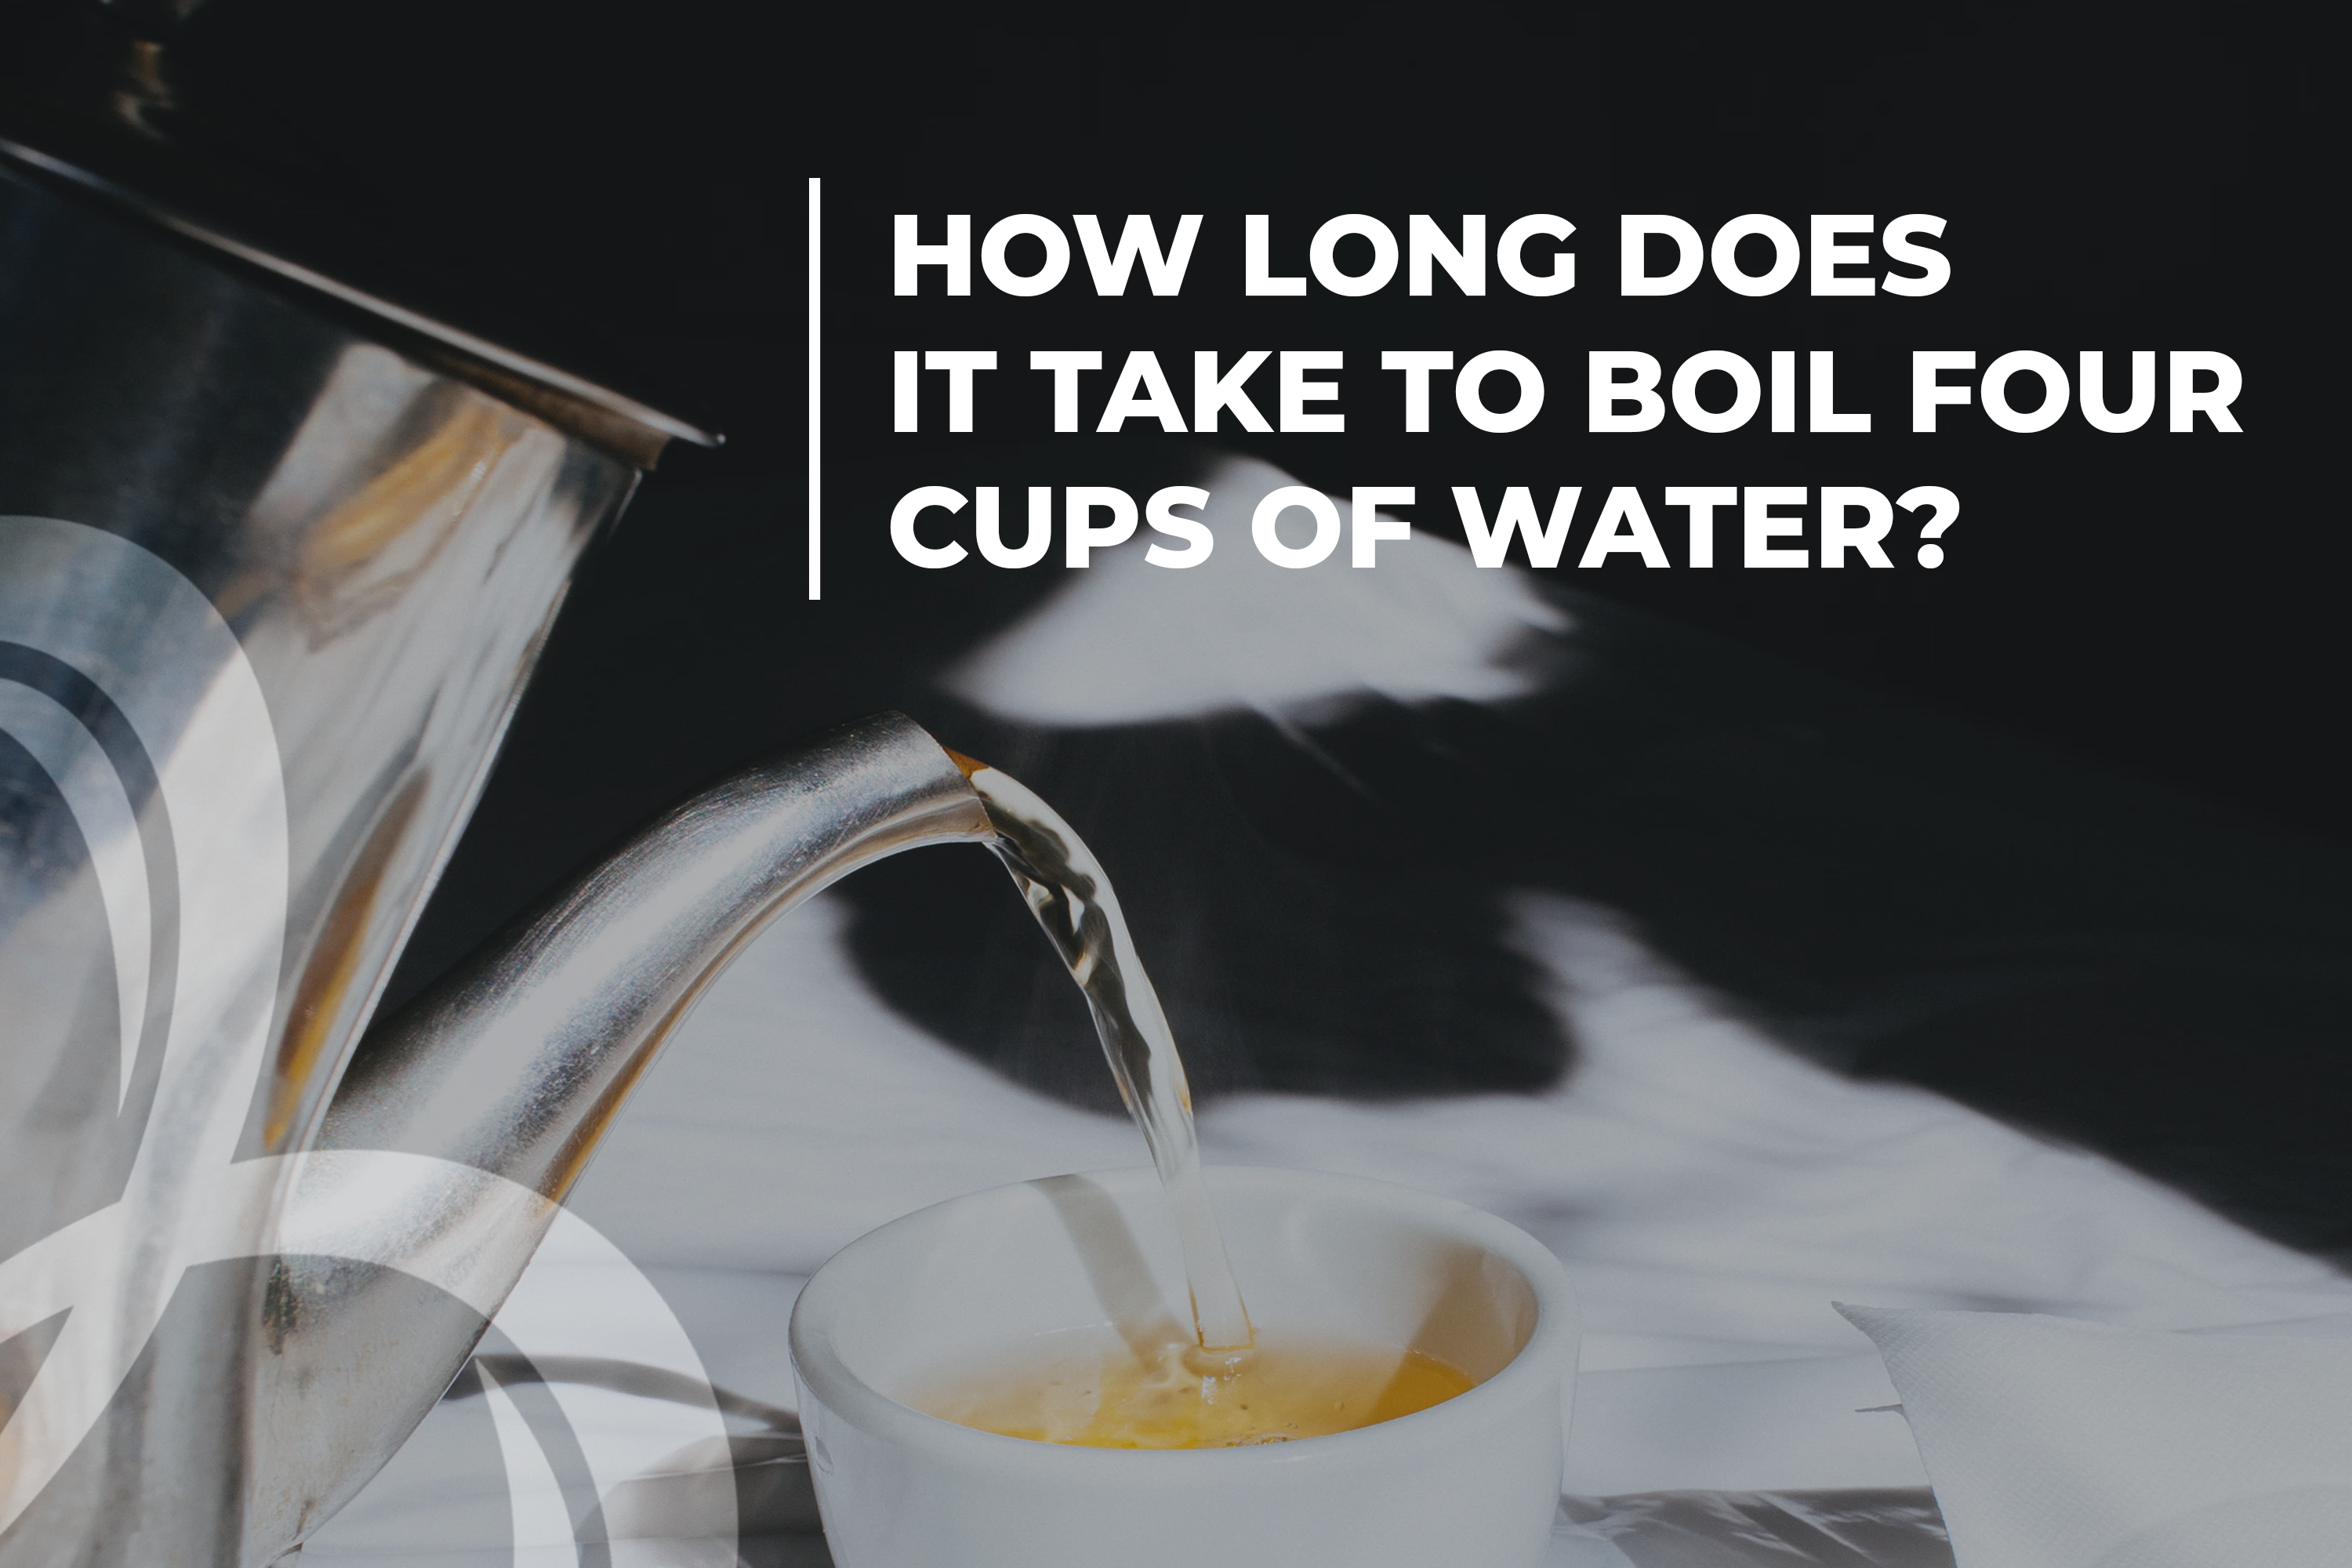 How long does it take to boil four cups of water